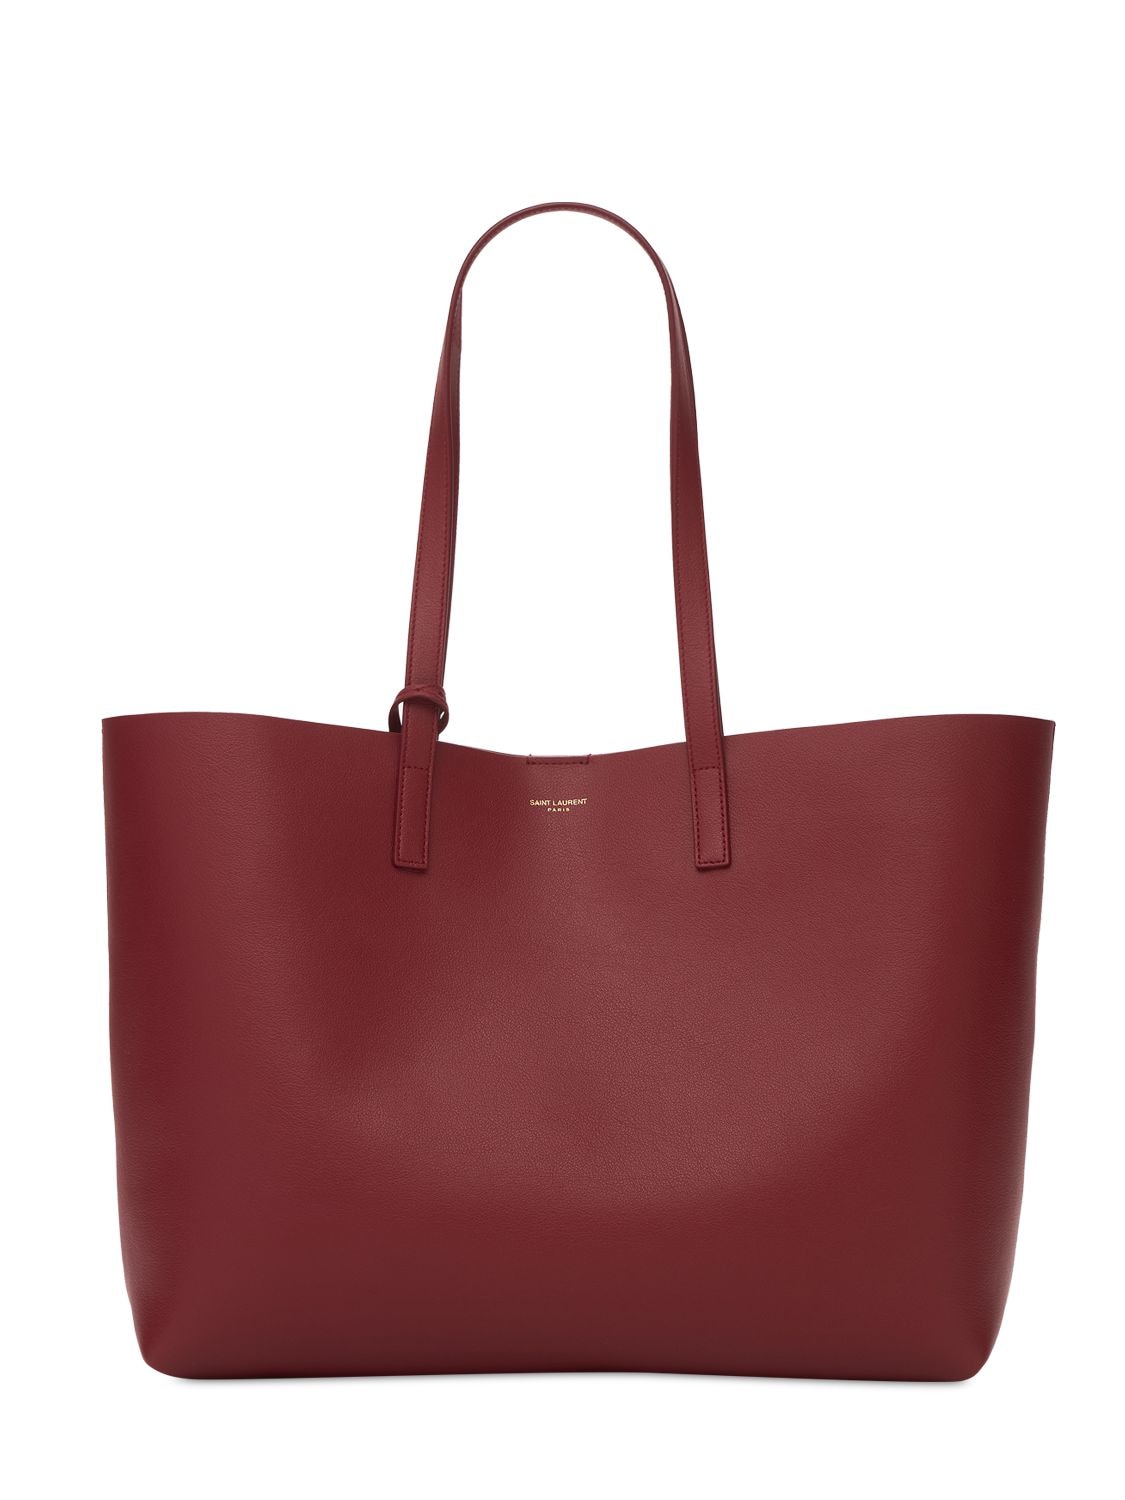 Saint Laurent Leather Bag In Opyum Red